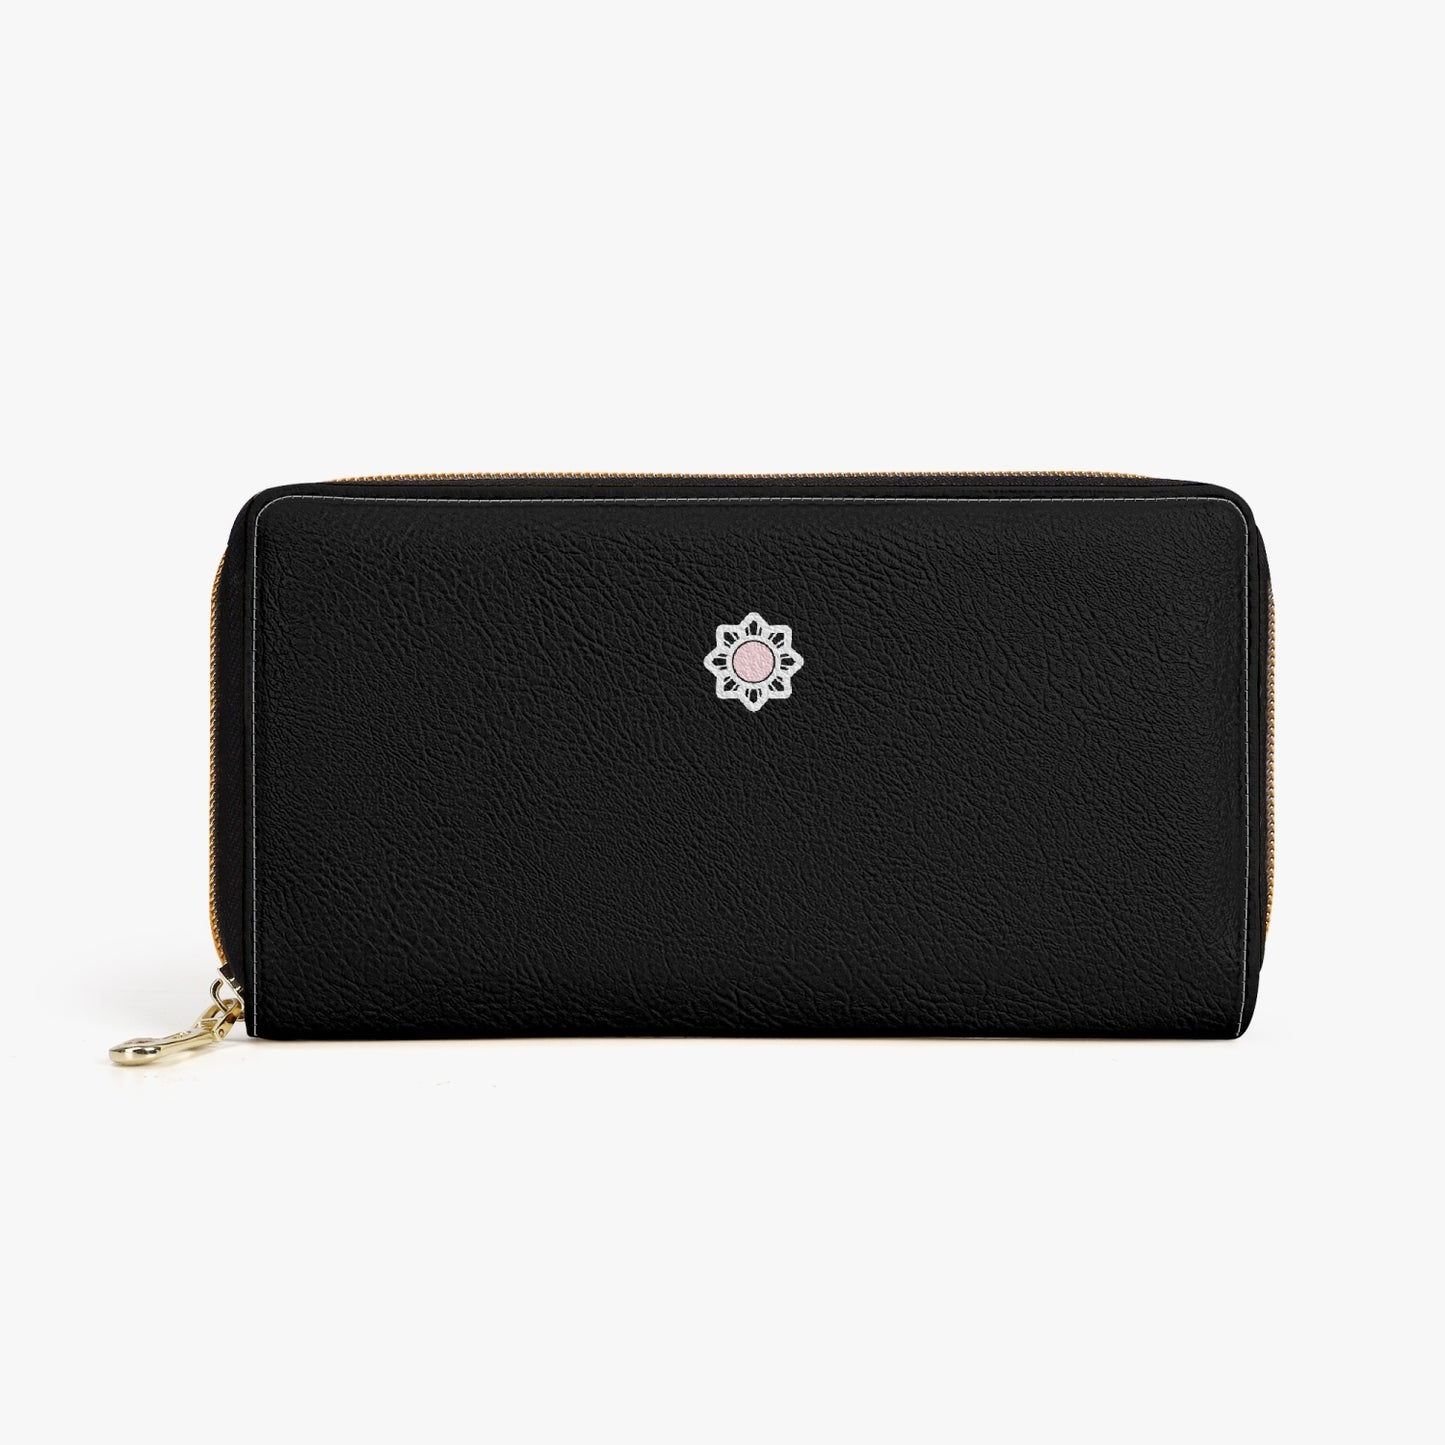 Zipper Wallet, Black, Gifts for her